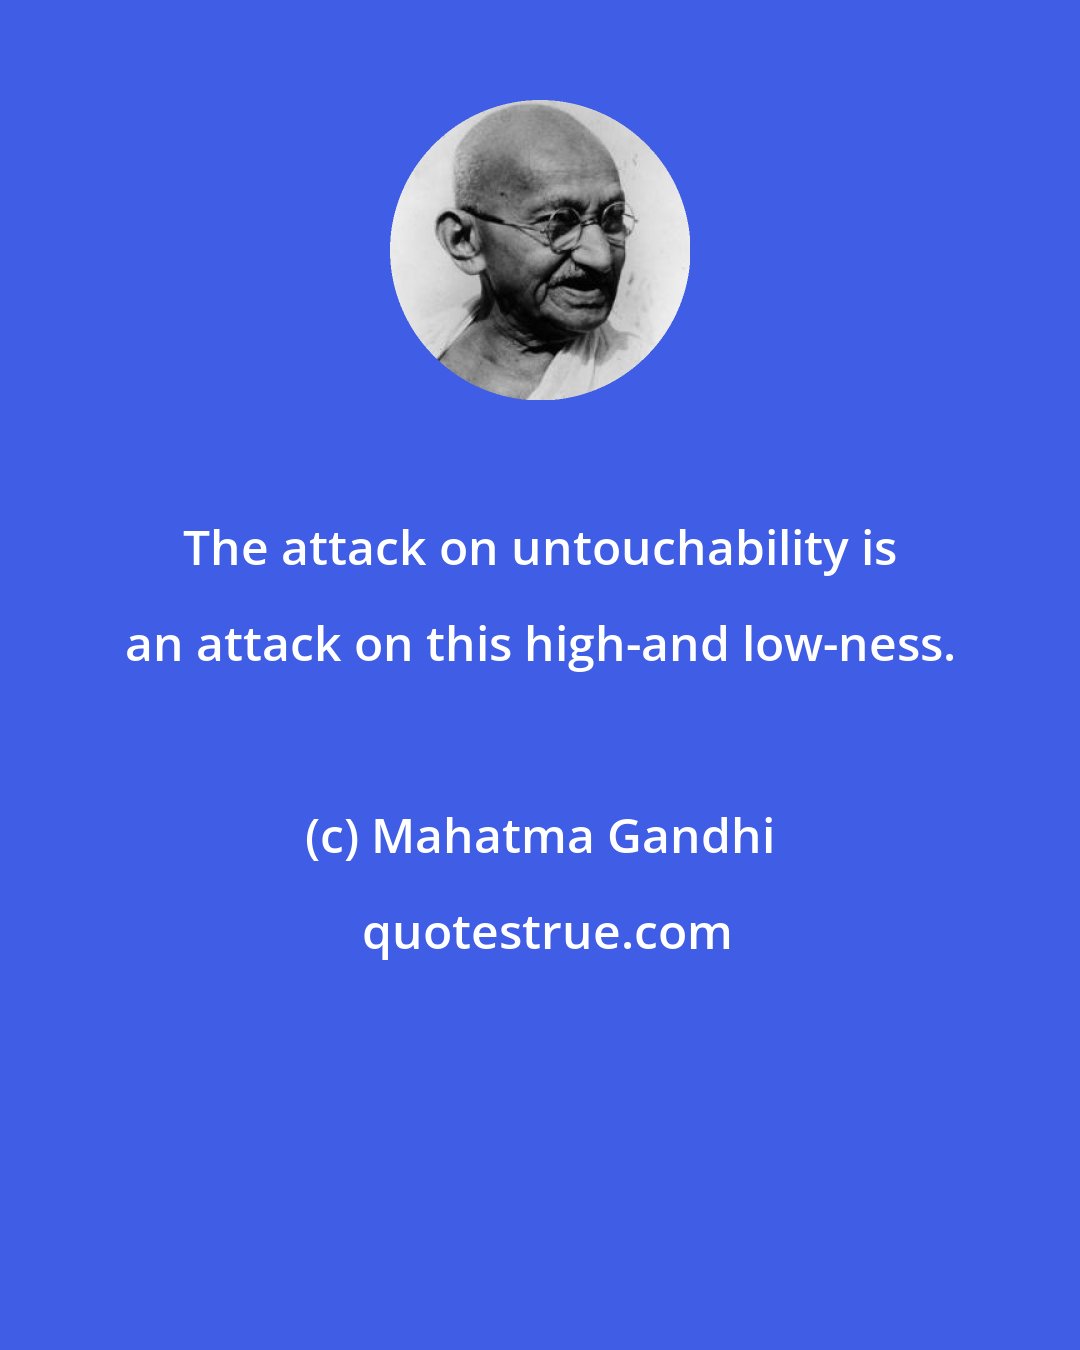 Mahatma Gandhi: The attack on untouchability is an attack on this high-and low-ness.